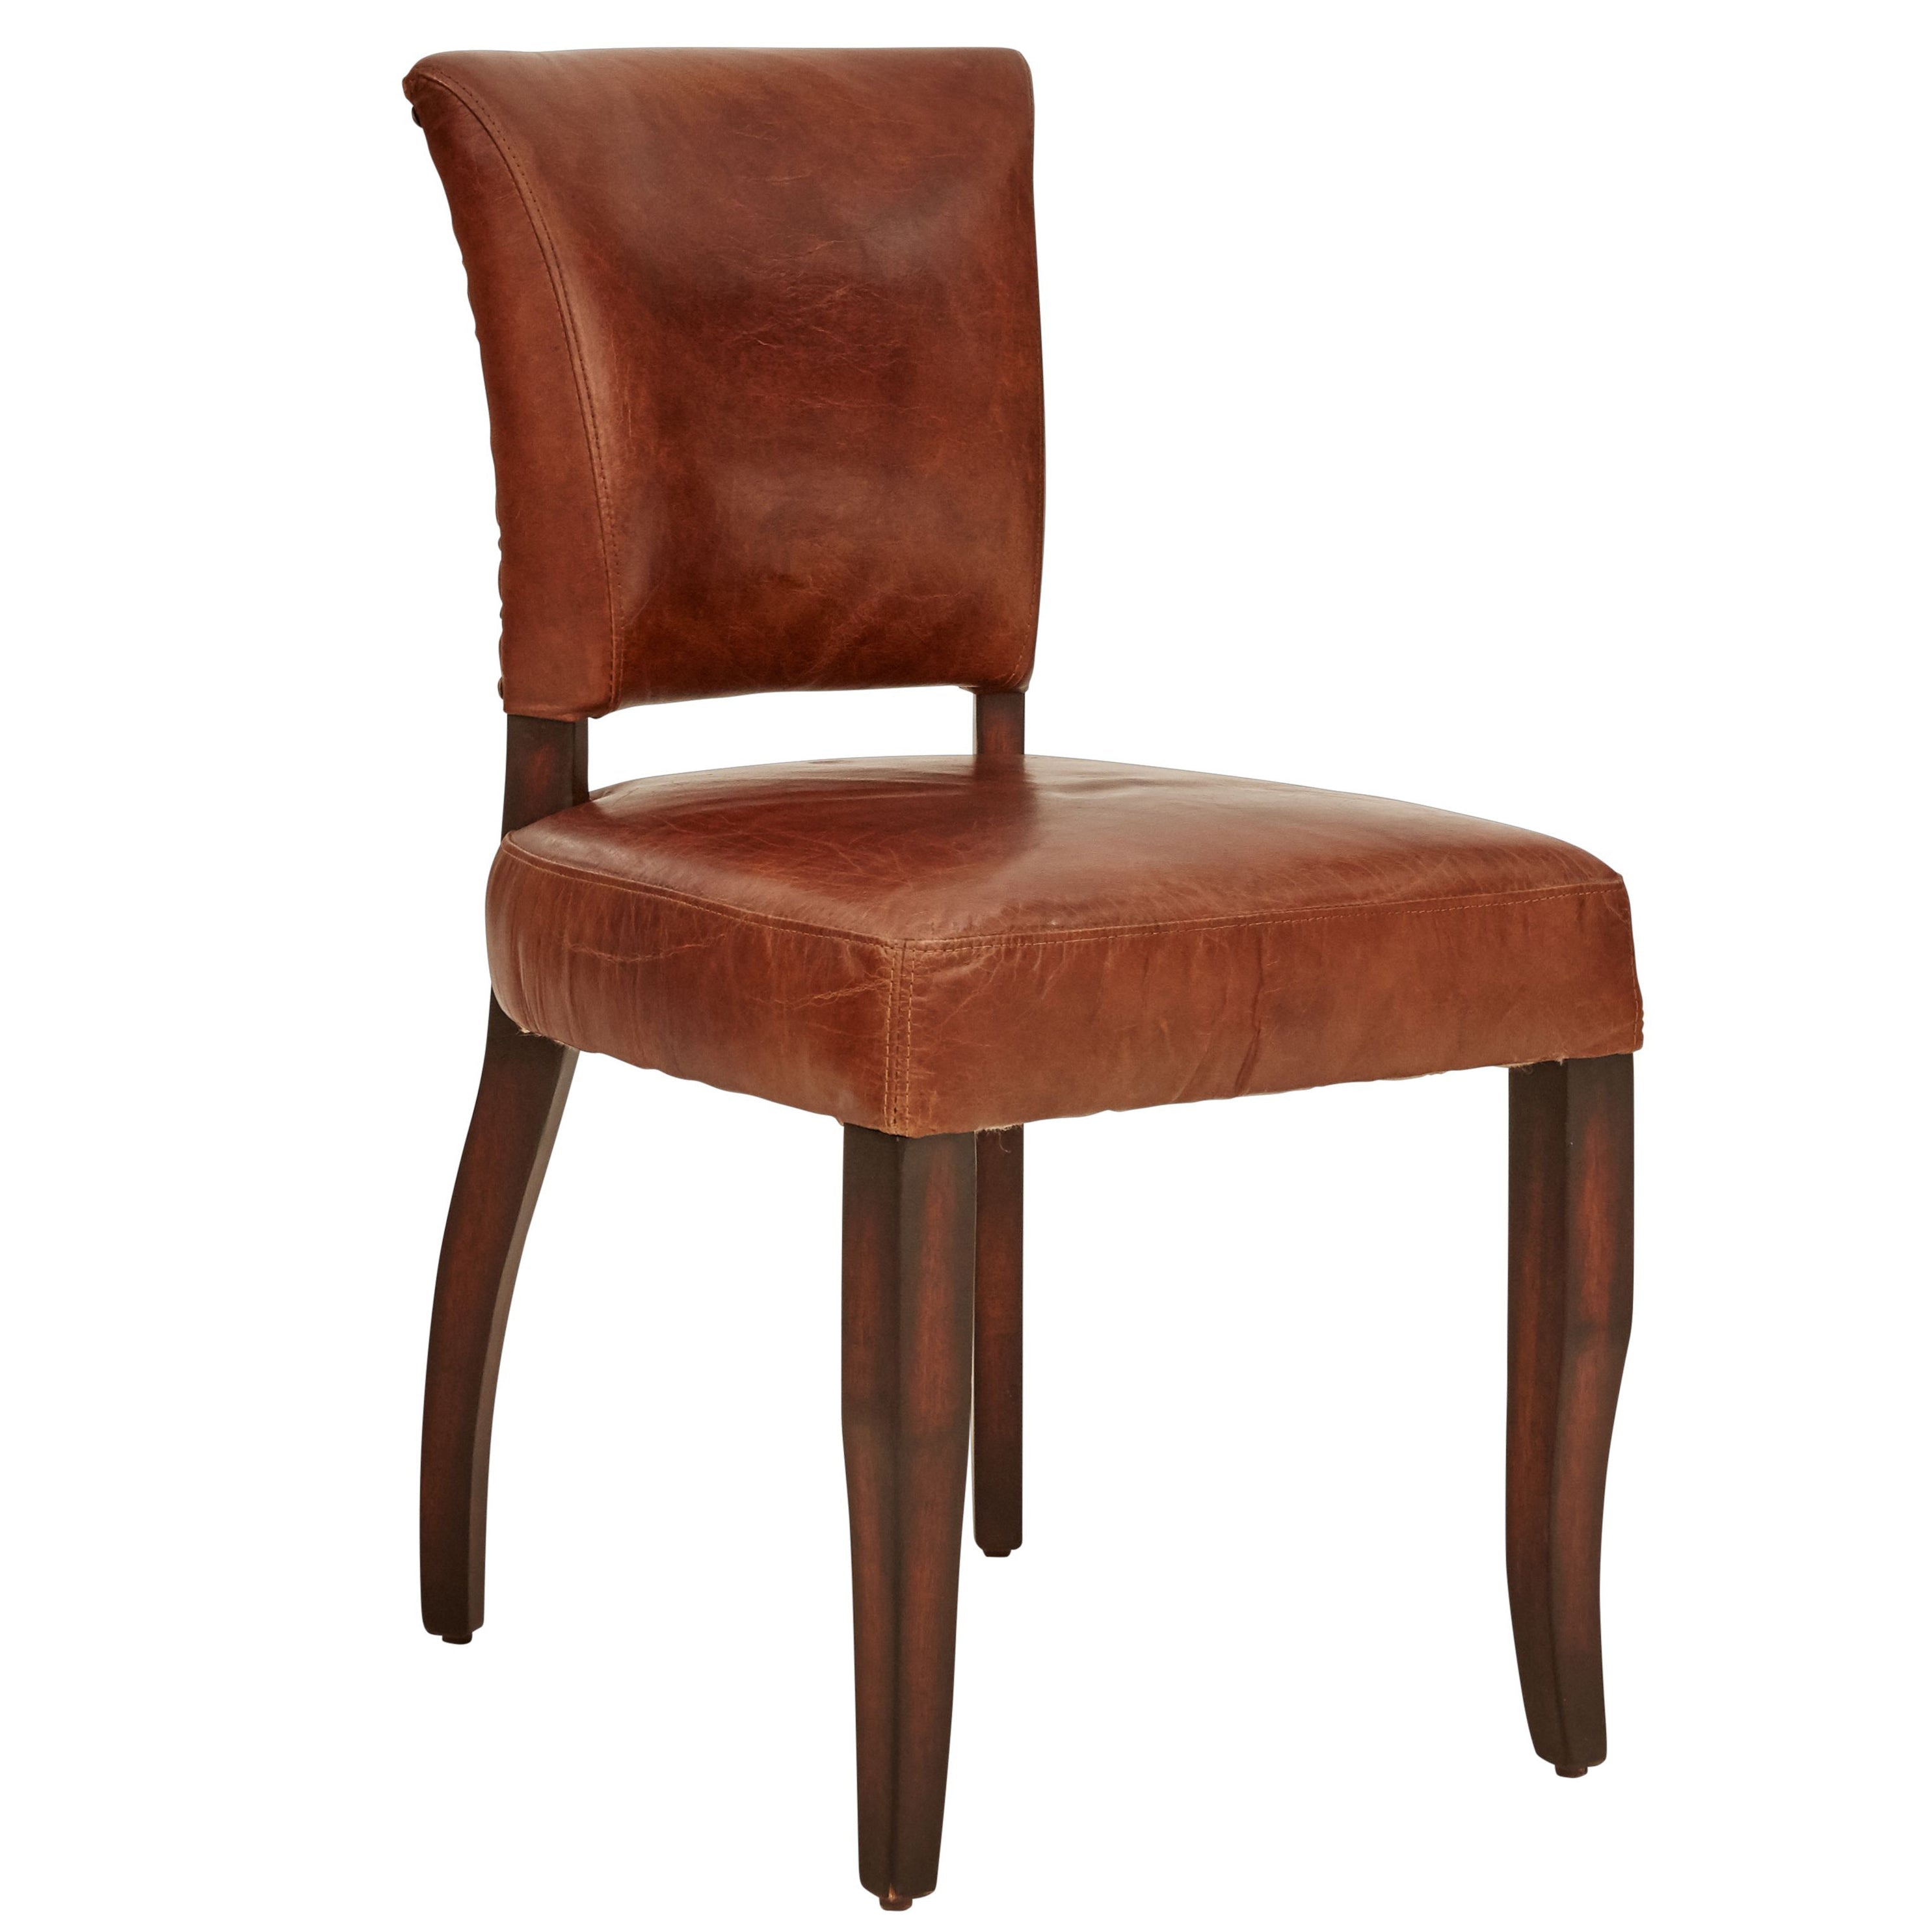 Beaufort Vintage Leather Dining Chair - Dovetailed & Doublestitched